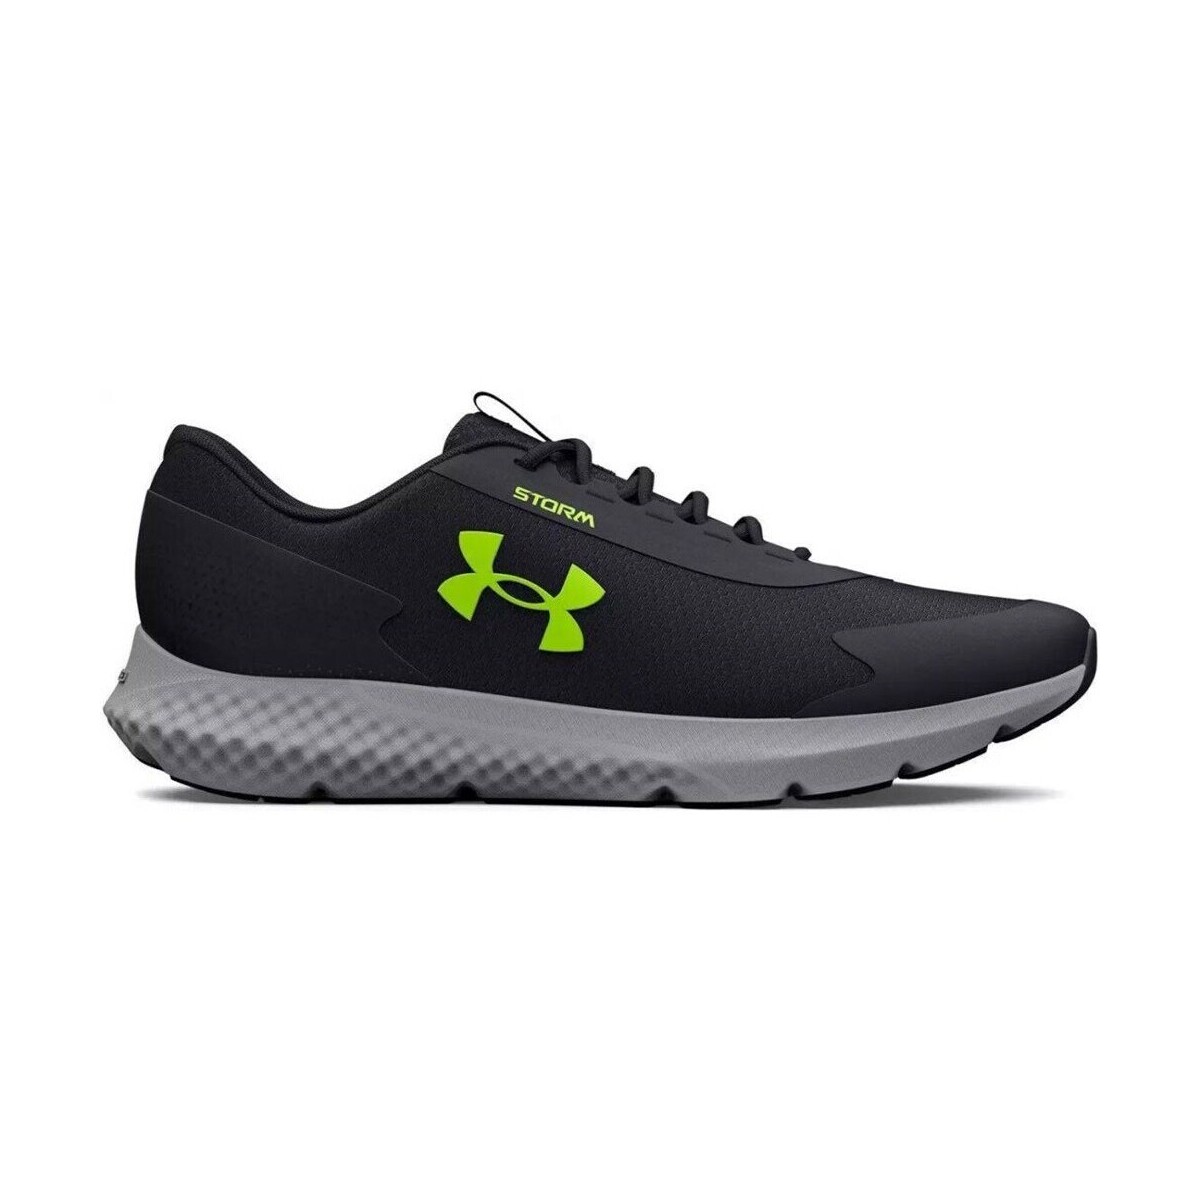 Under Armour Charged Rouge Storm Black